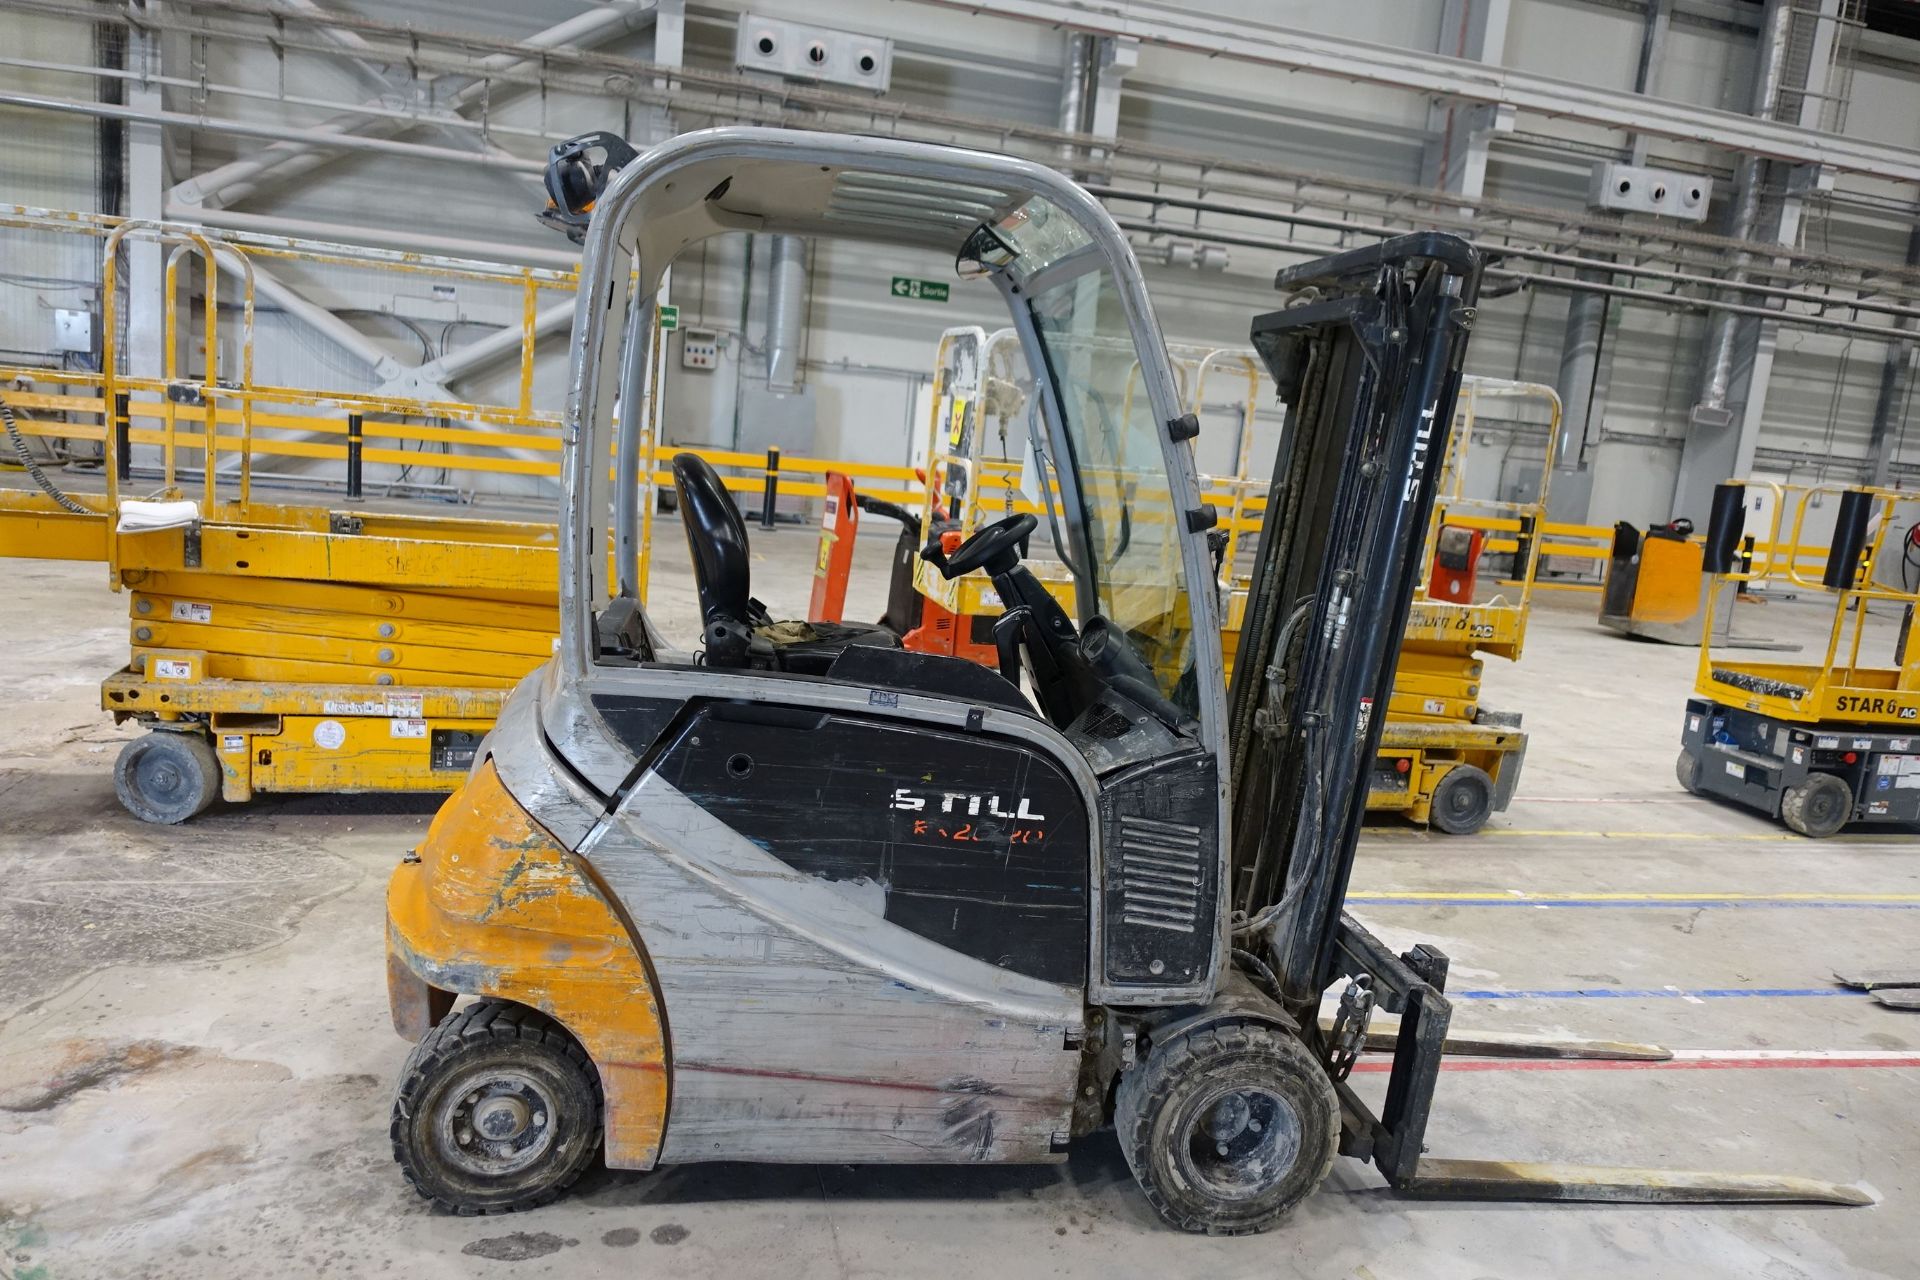 STILL RX20-20P Electric Forklift Truck, 2,000kg Capacity with Sideshift, Ser # 516216H00371 (2017) - Image 6 of 42